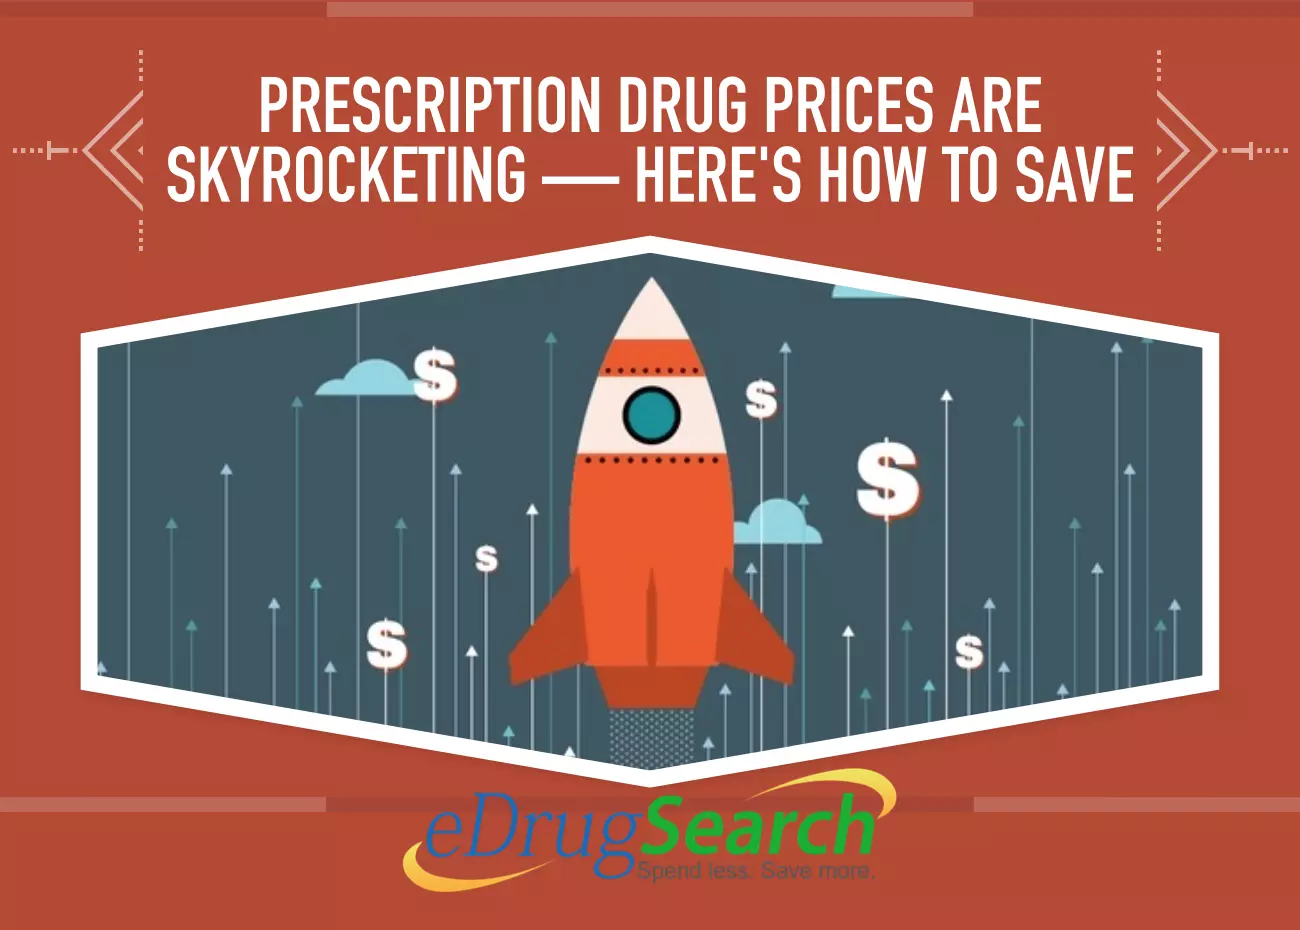 Prescription Drug Prices Are Skyrocketing — Here's How to Save